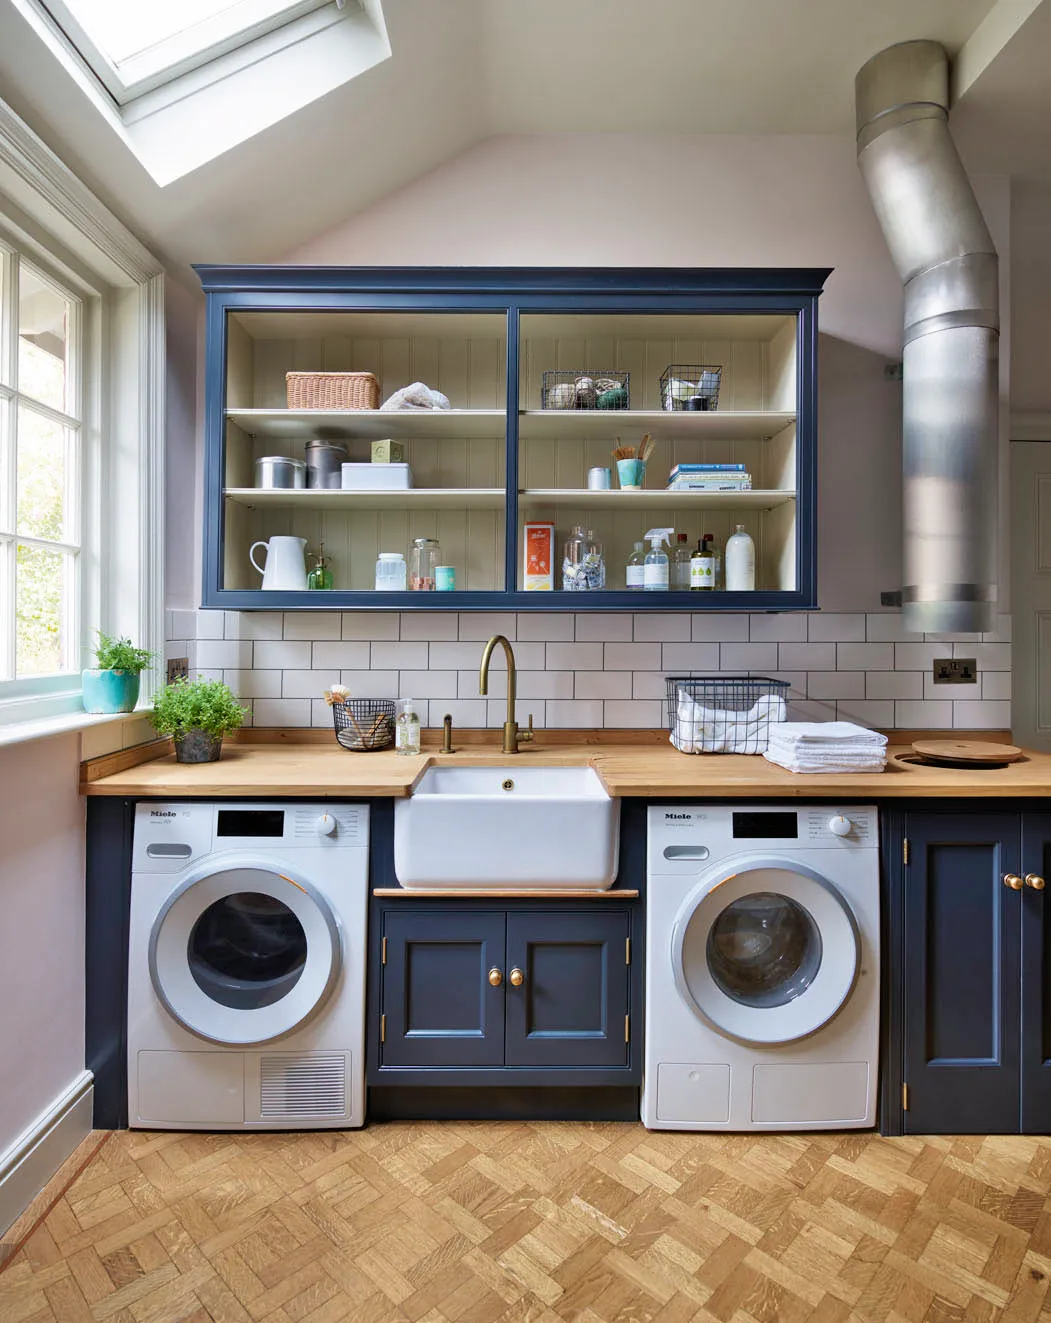 An Easy Guide to Choosing a Laundry Room Sink